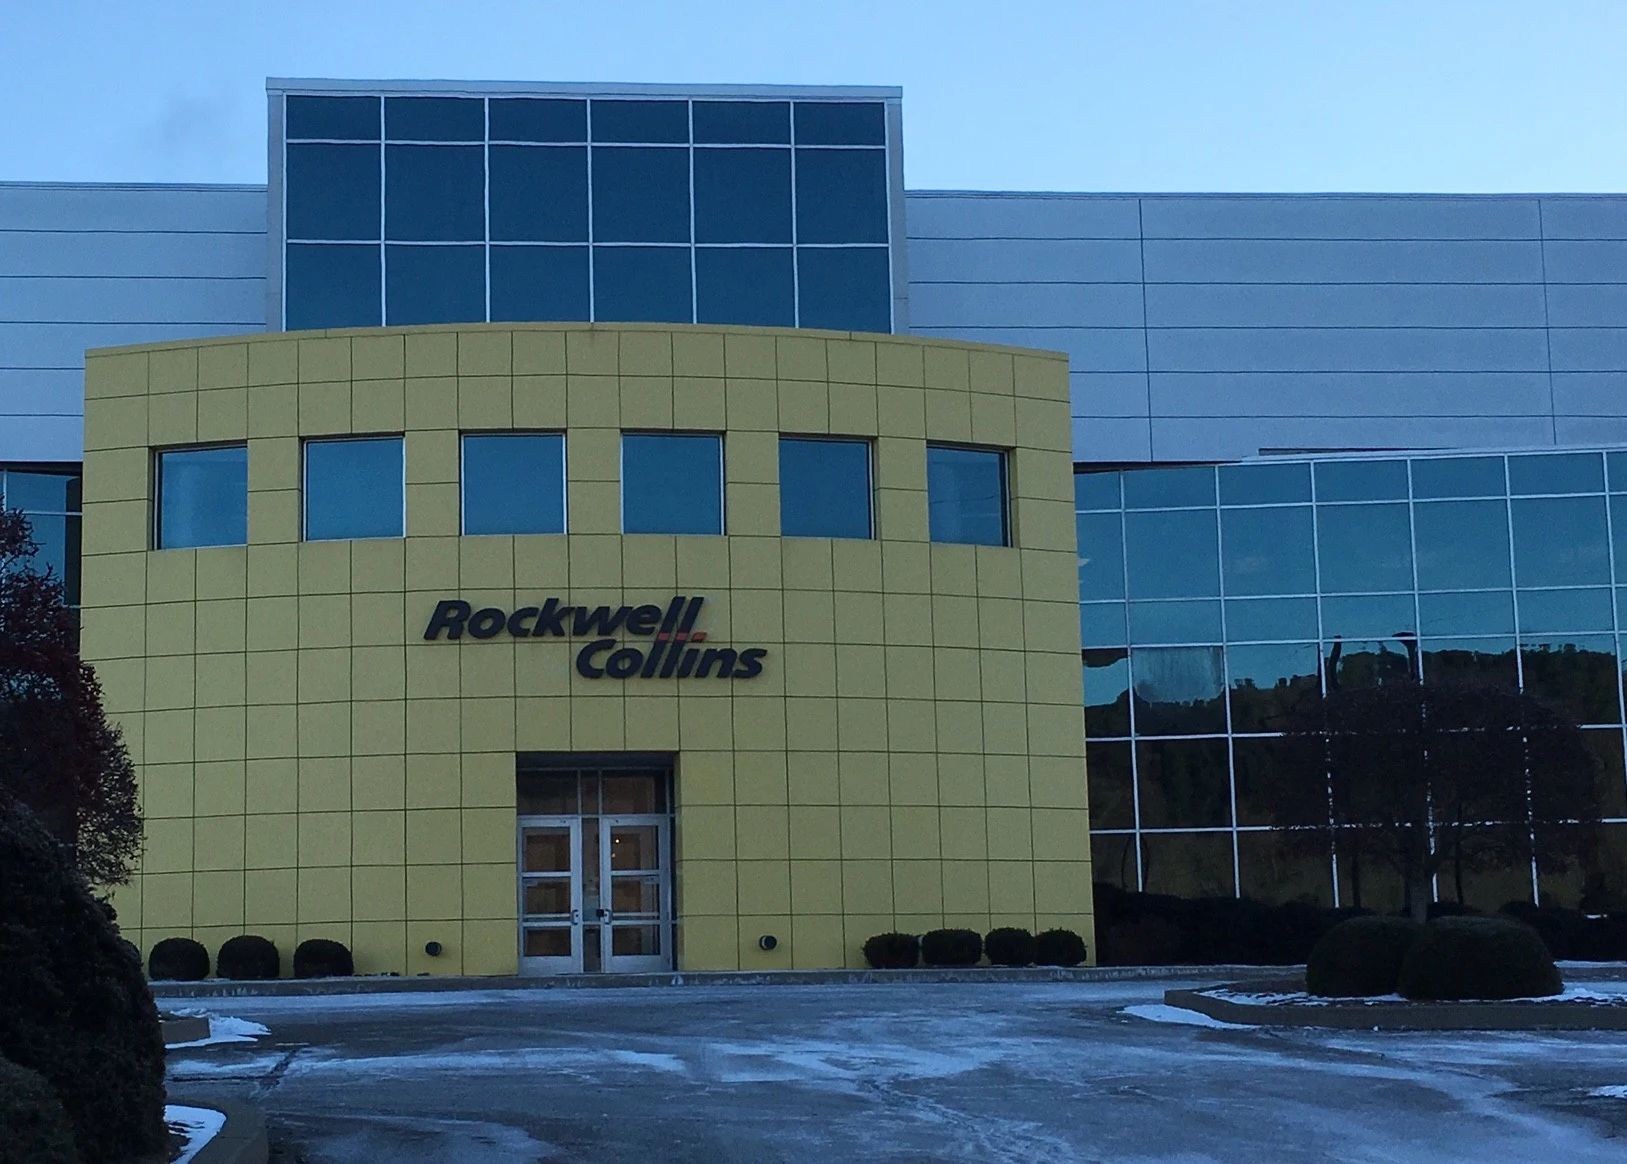 rockwell collins